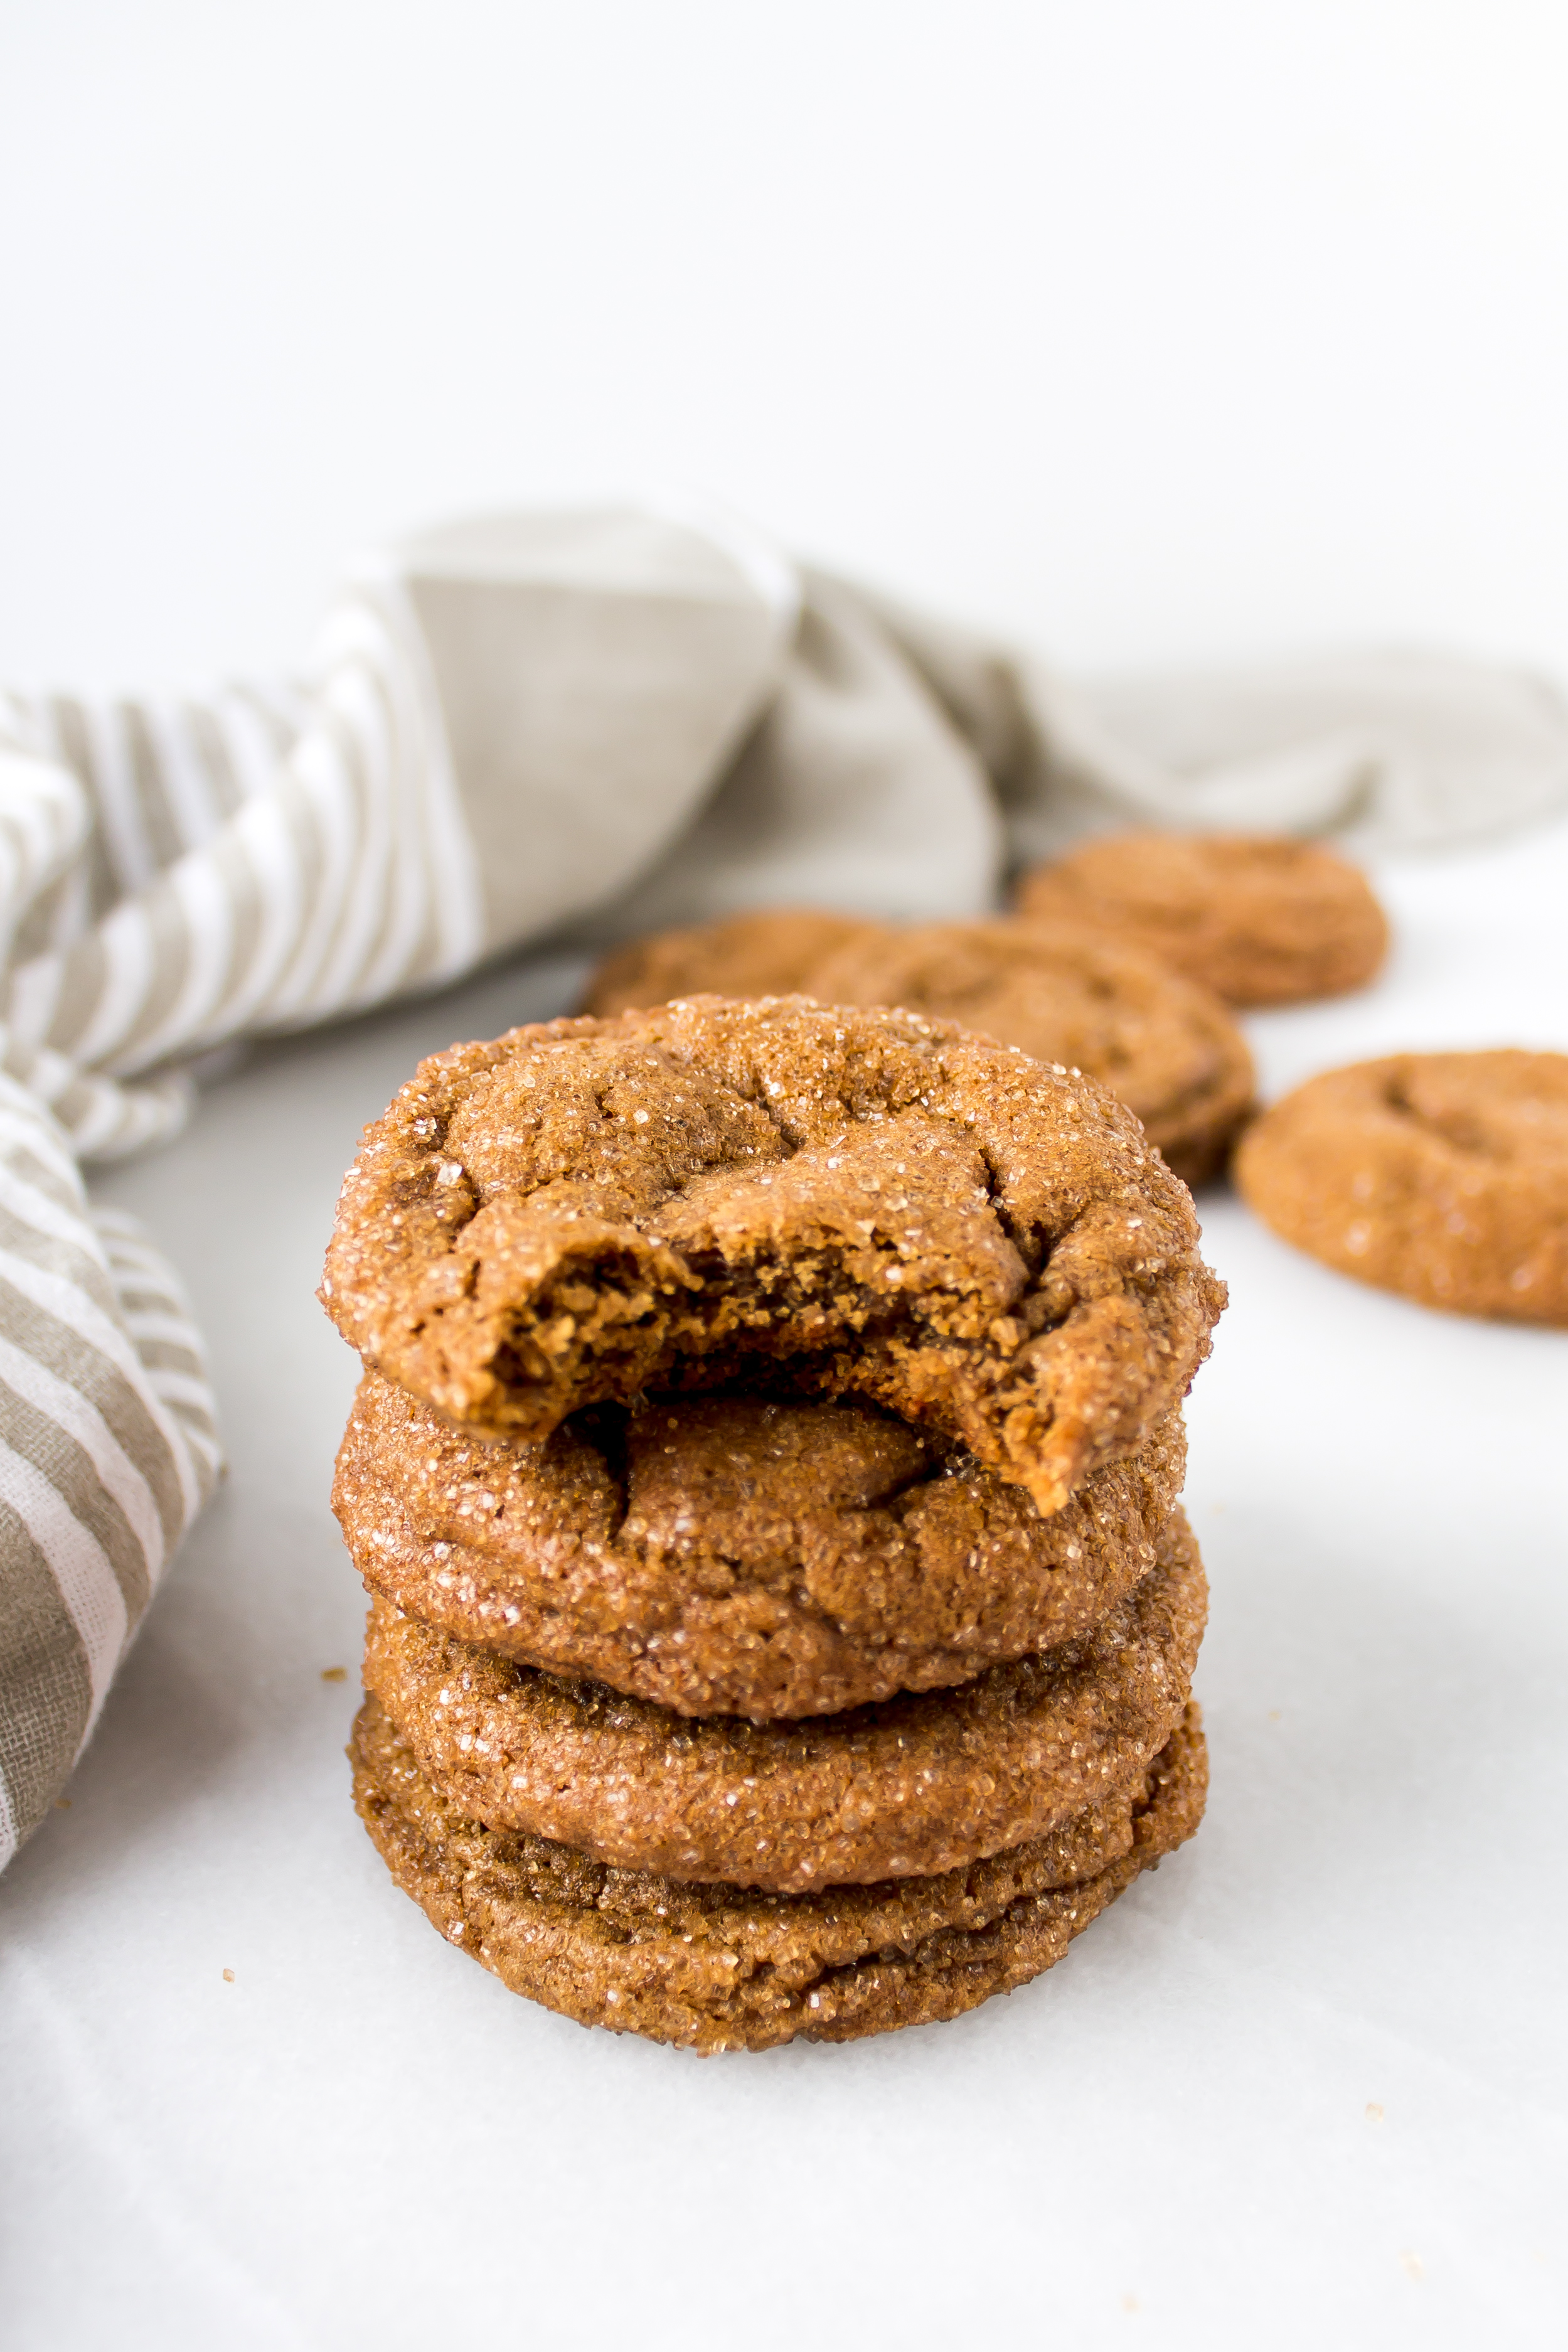 Chewy ginger cookies are the perfect treat any time of the year, but especially shine when the weather gets colder. These are perfectly soft and chewy in the center - the best kind of cookie. | Pass the Cookies | www.passthecookies.com